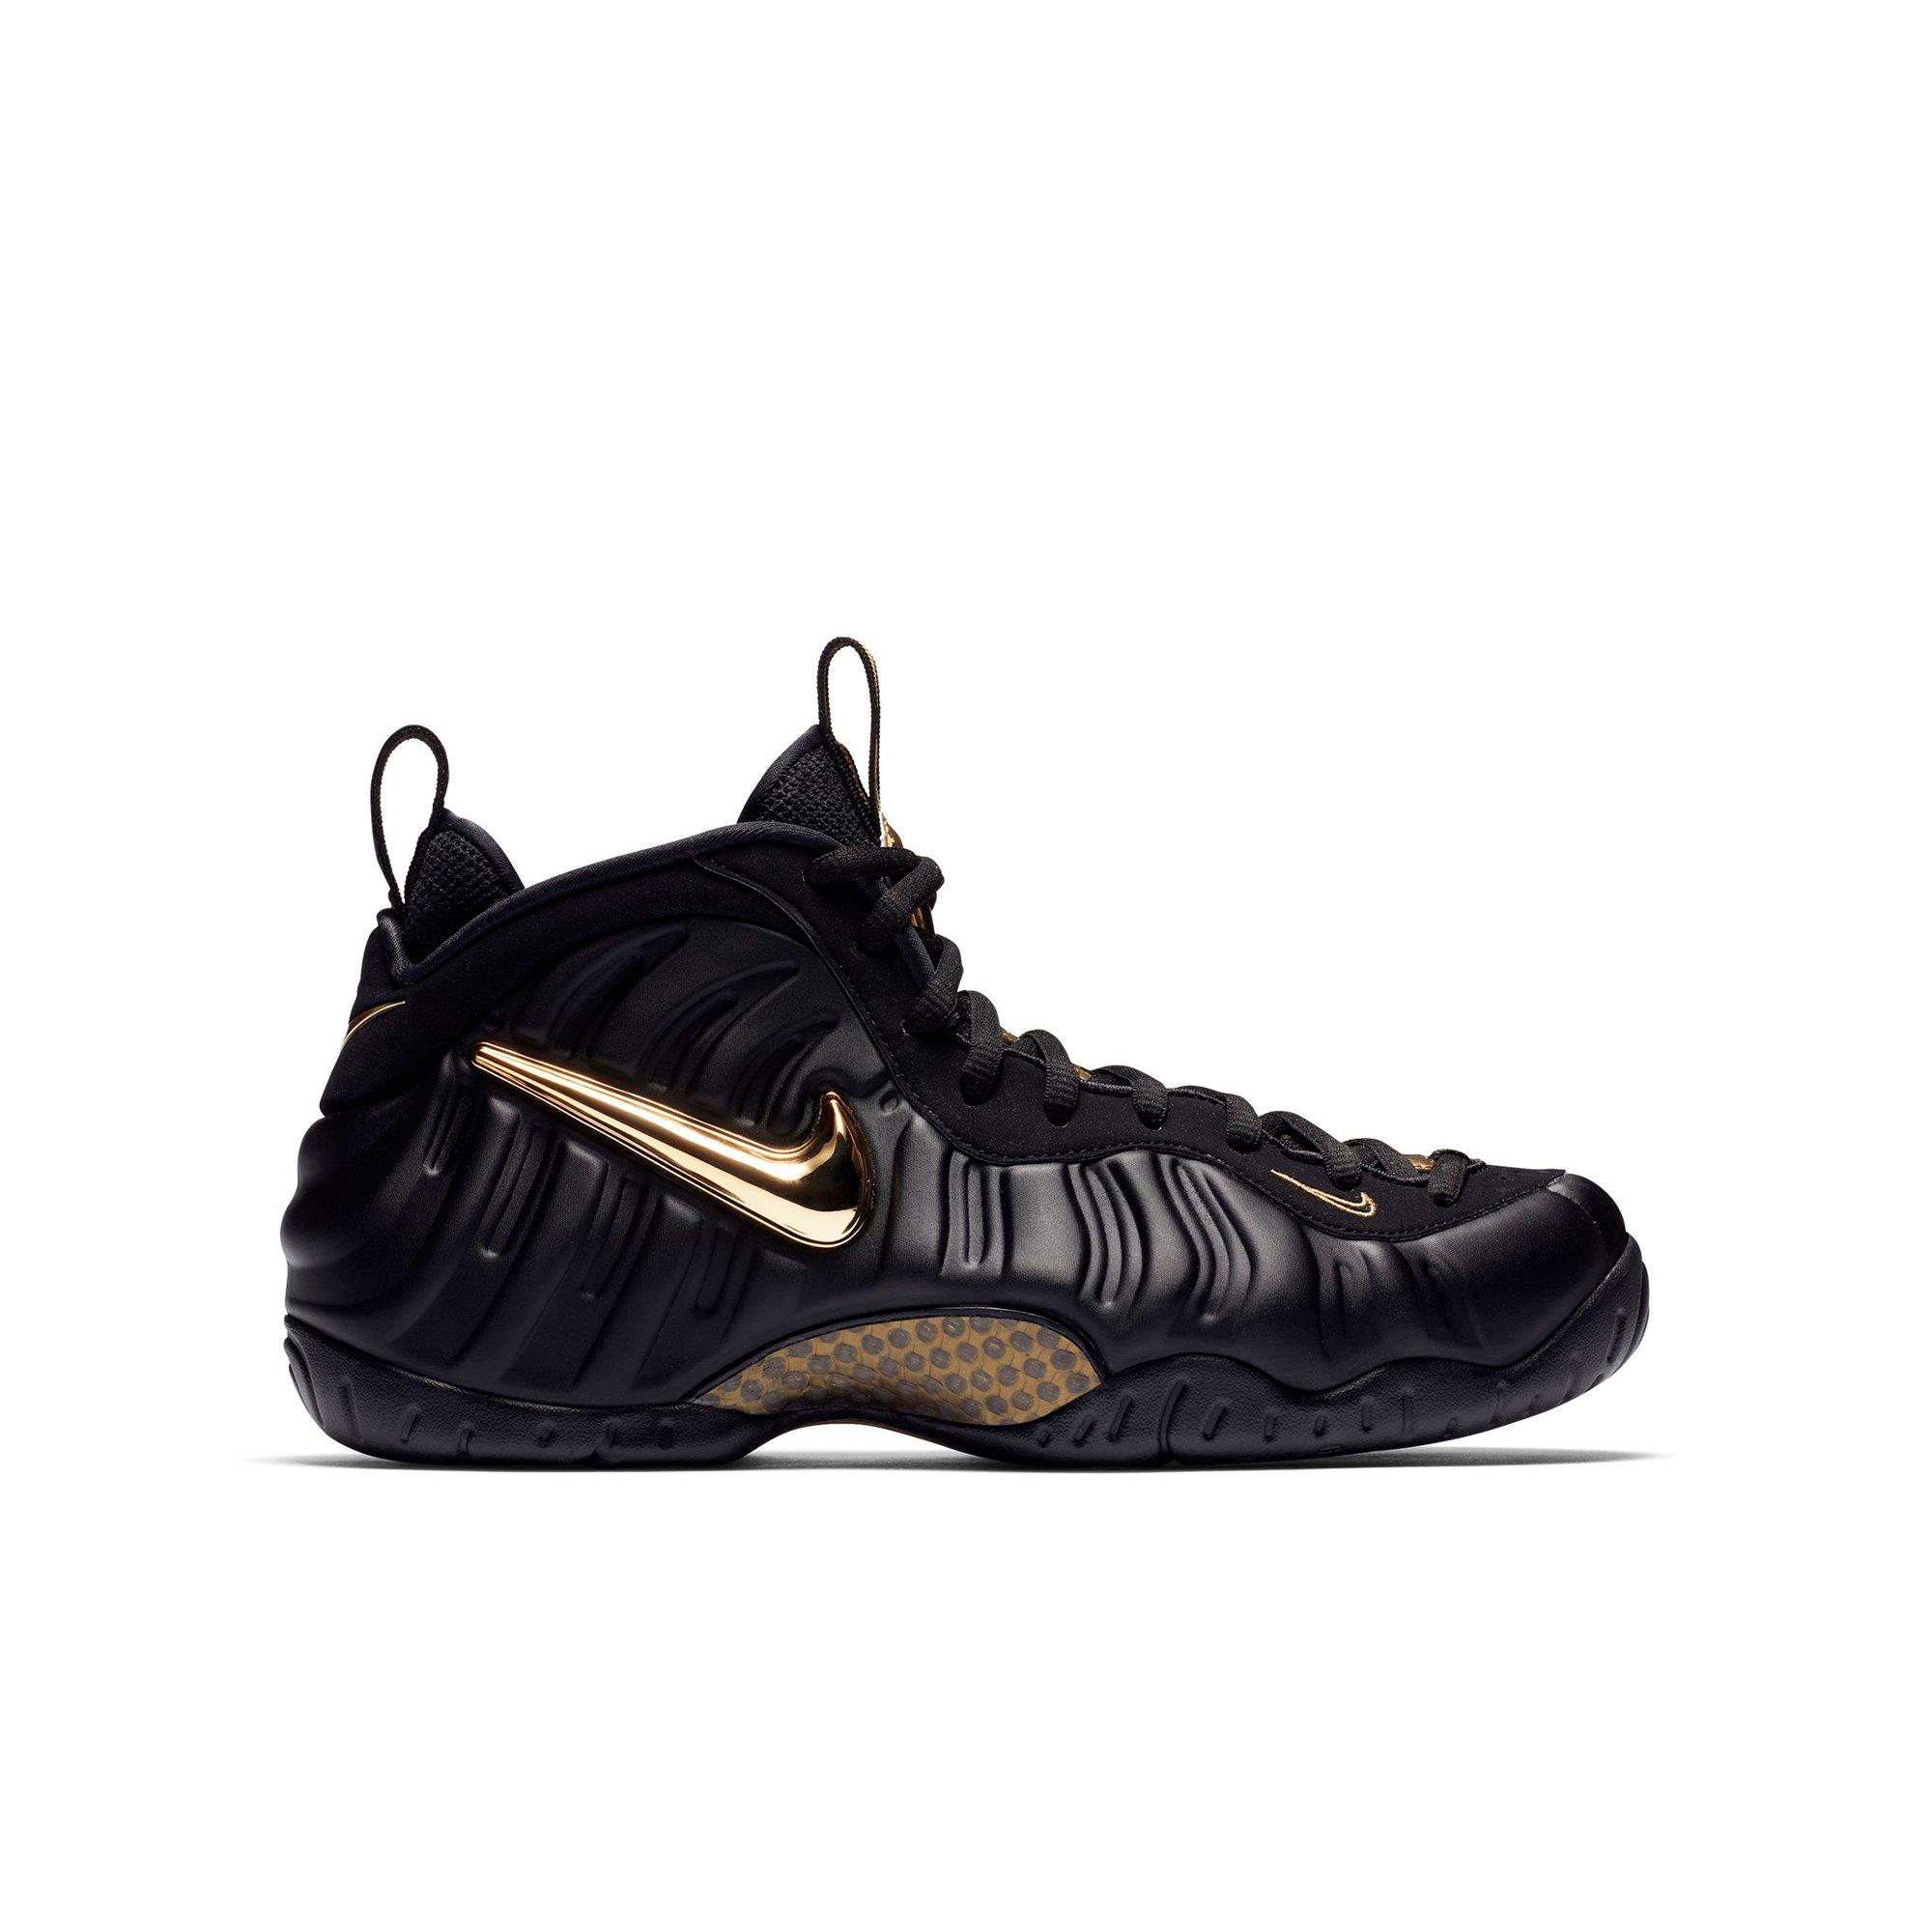 black and gold foams for kids